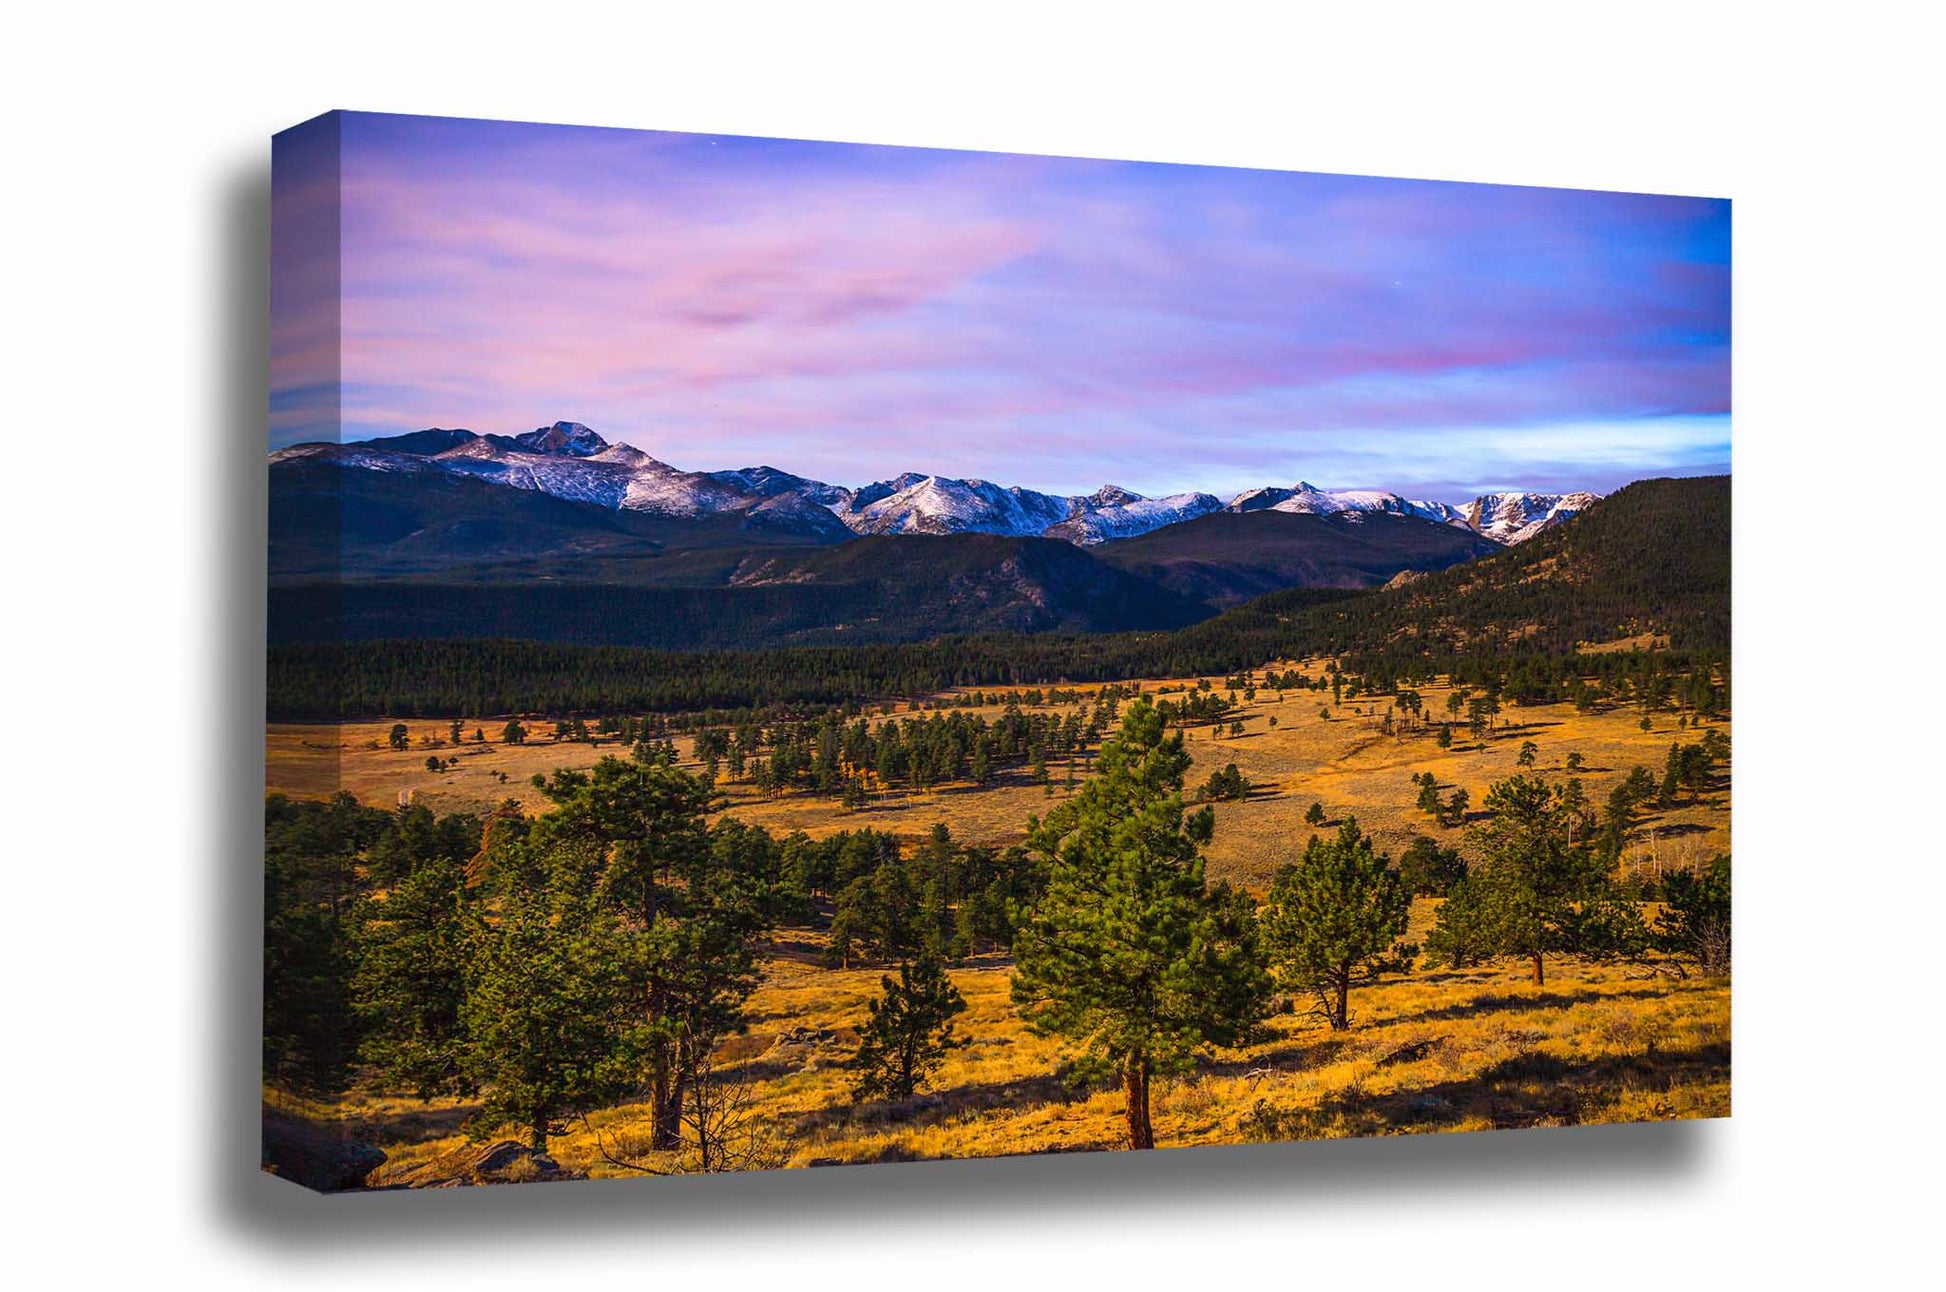 Western landscape canvas wall art of snowy peaks overlooking a mountain valley at dusk on an autumn evening in Rocky Mountain National Park near Estes Park, Colorado by Sean Ramsey of Southern Plains Photography.